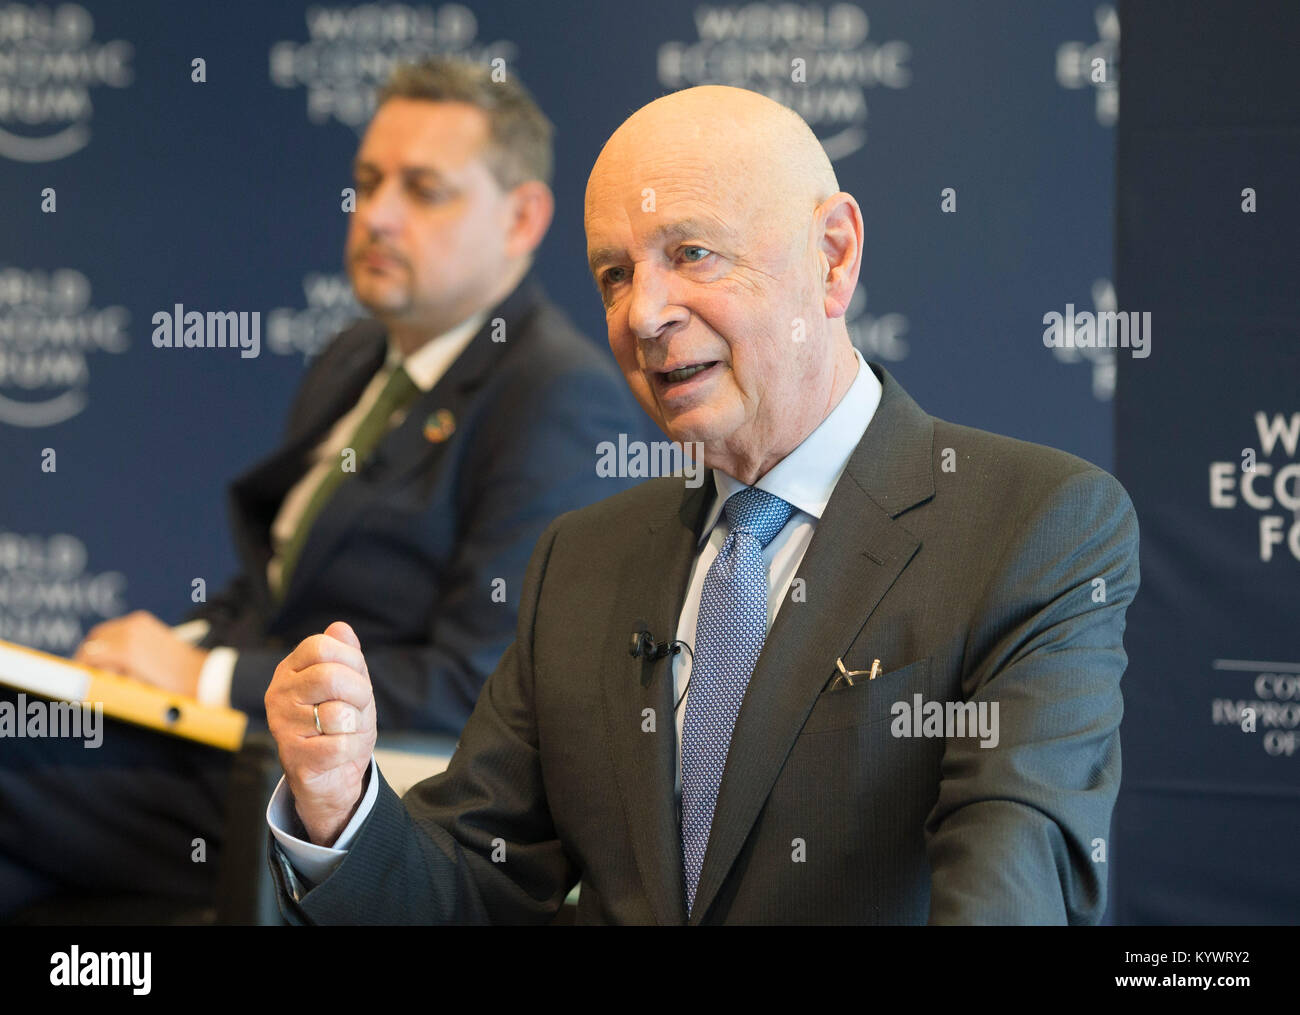 Geneva, Switzerland. 16th Jan, 2018. Klaus Schwab, founder and chief executive of the World Economic Forum (WEF), gestures at a press conference in Geneva, Switzerland, Jan. 16, 2018. Schwab said Tuesday that he expects an 'important moment' in Davos when China shares with the world new information about its economic development. Credit: Xu Jinquan/Xinhua/Alamy Live News Stock Photo